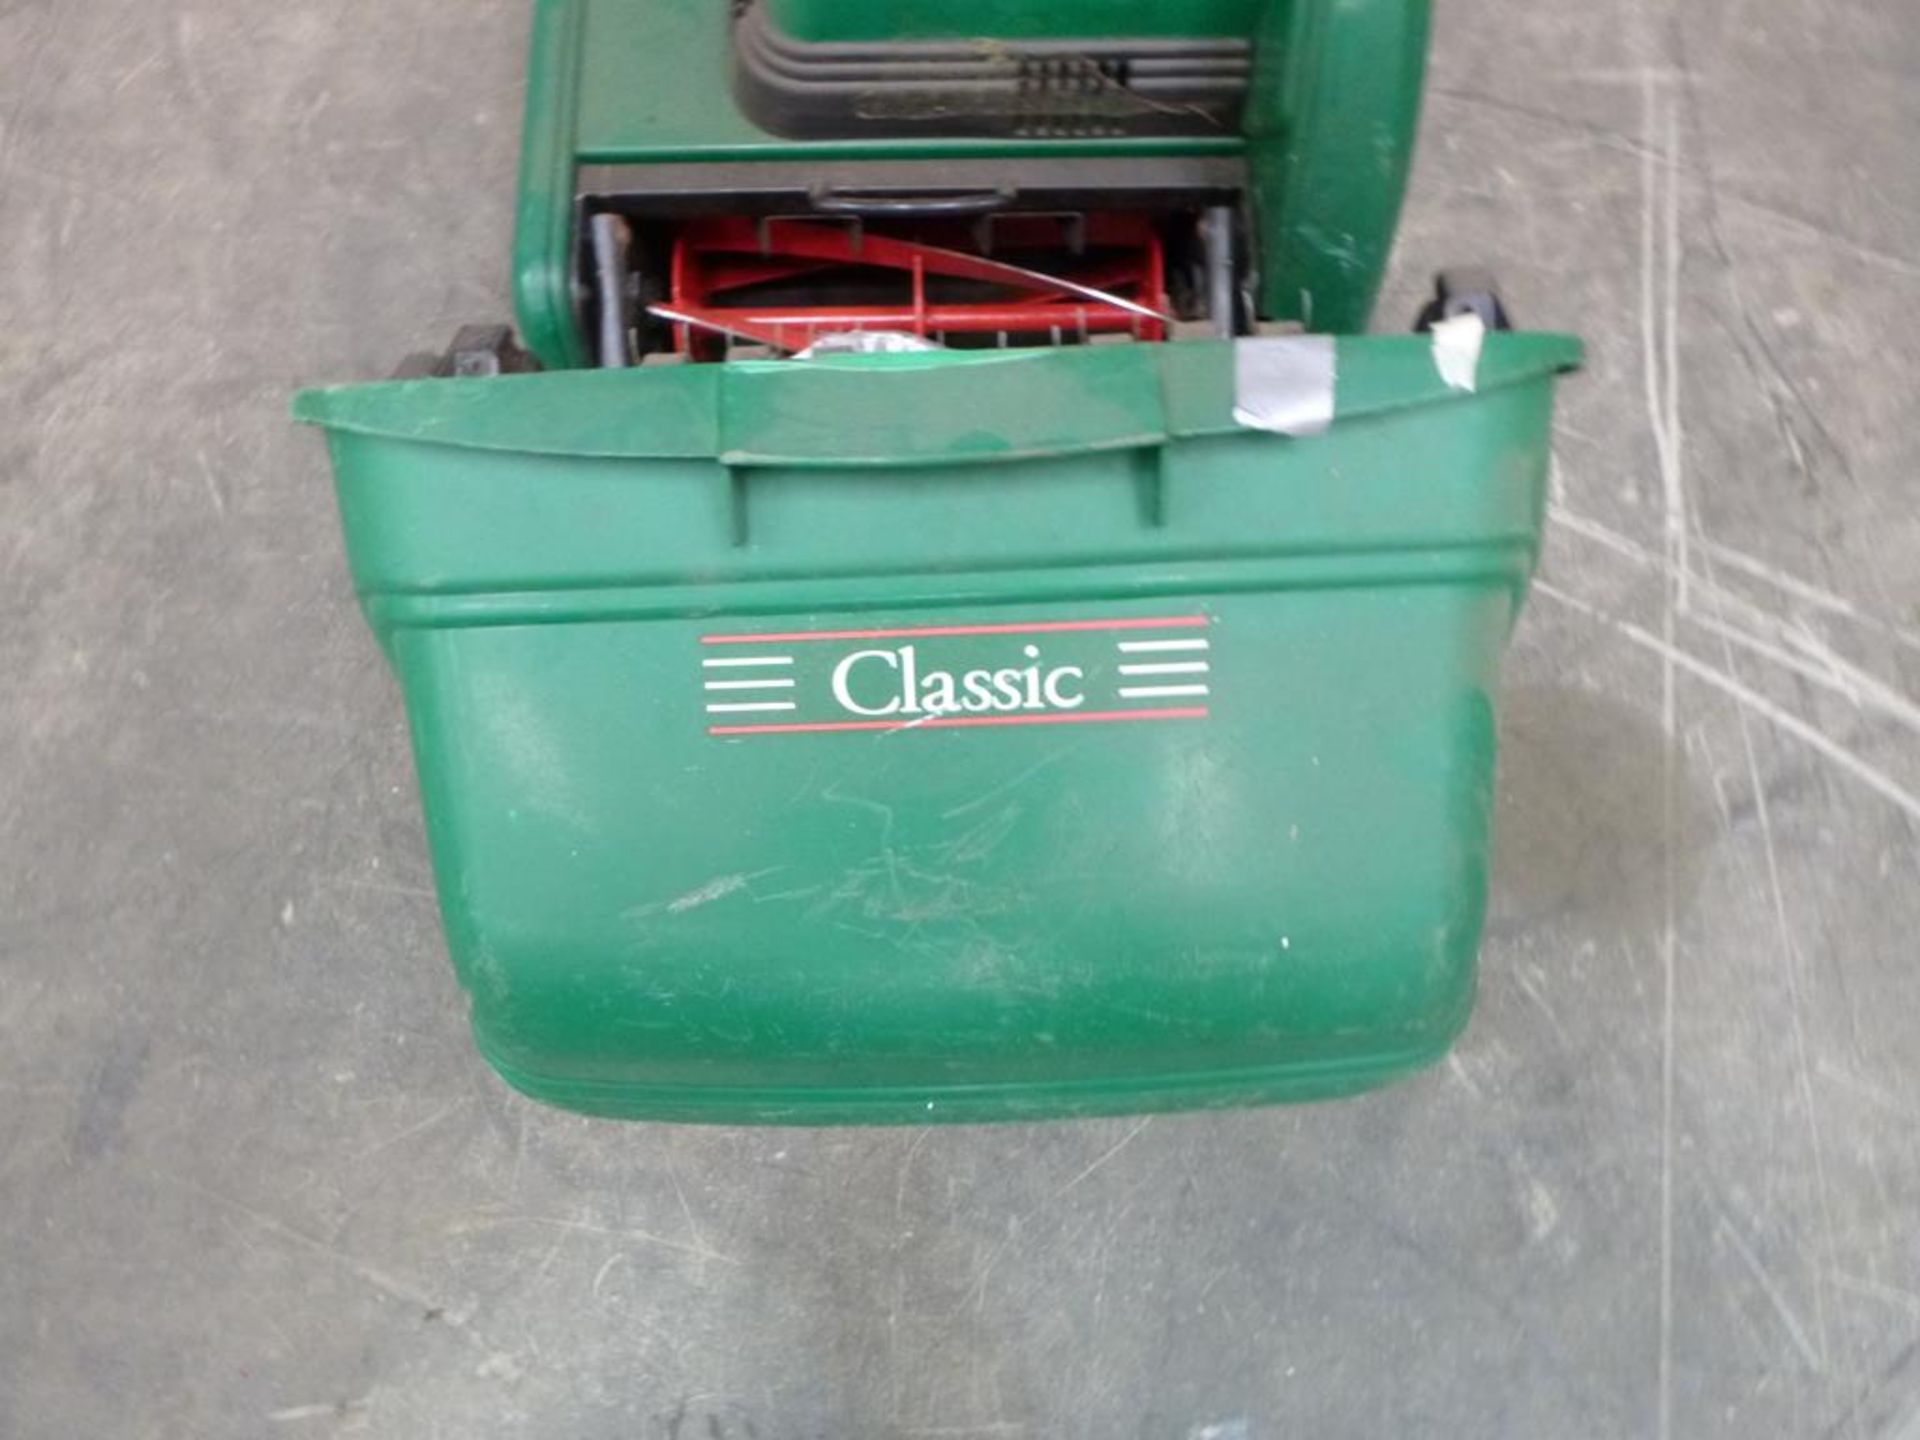 A Reconditioned Qualcast Classic 30 Electric Lawnmower with Lawnrake Cassette. Shop Price £99 - Image 2 of 3